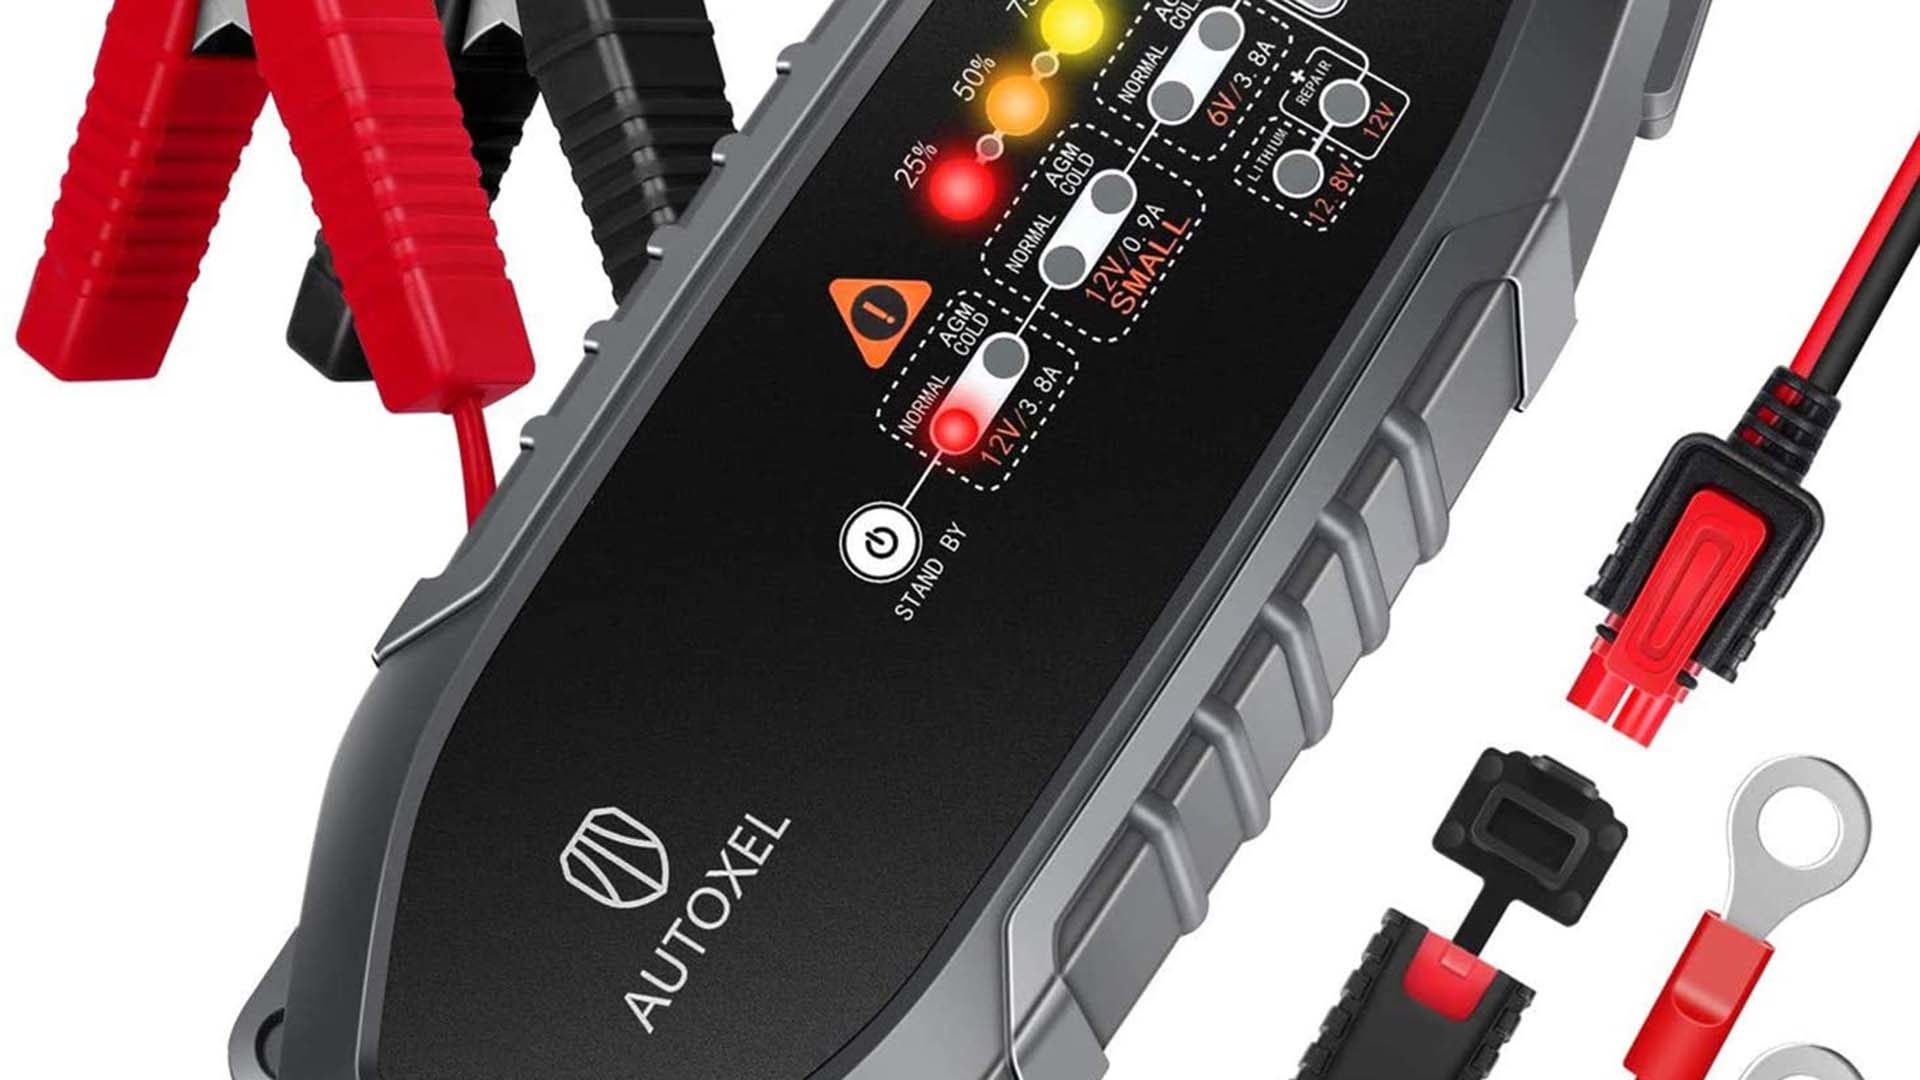 Autoexel car battery charger